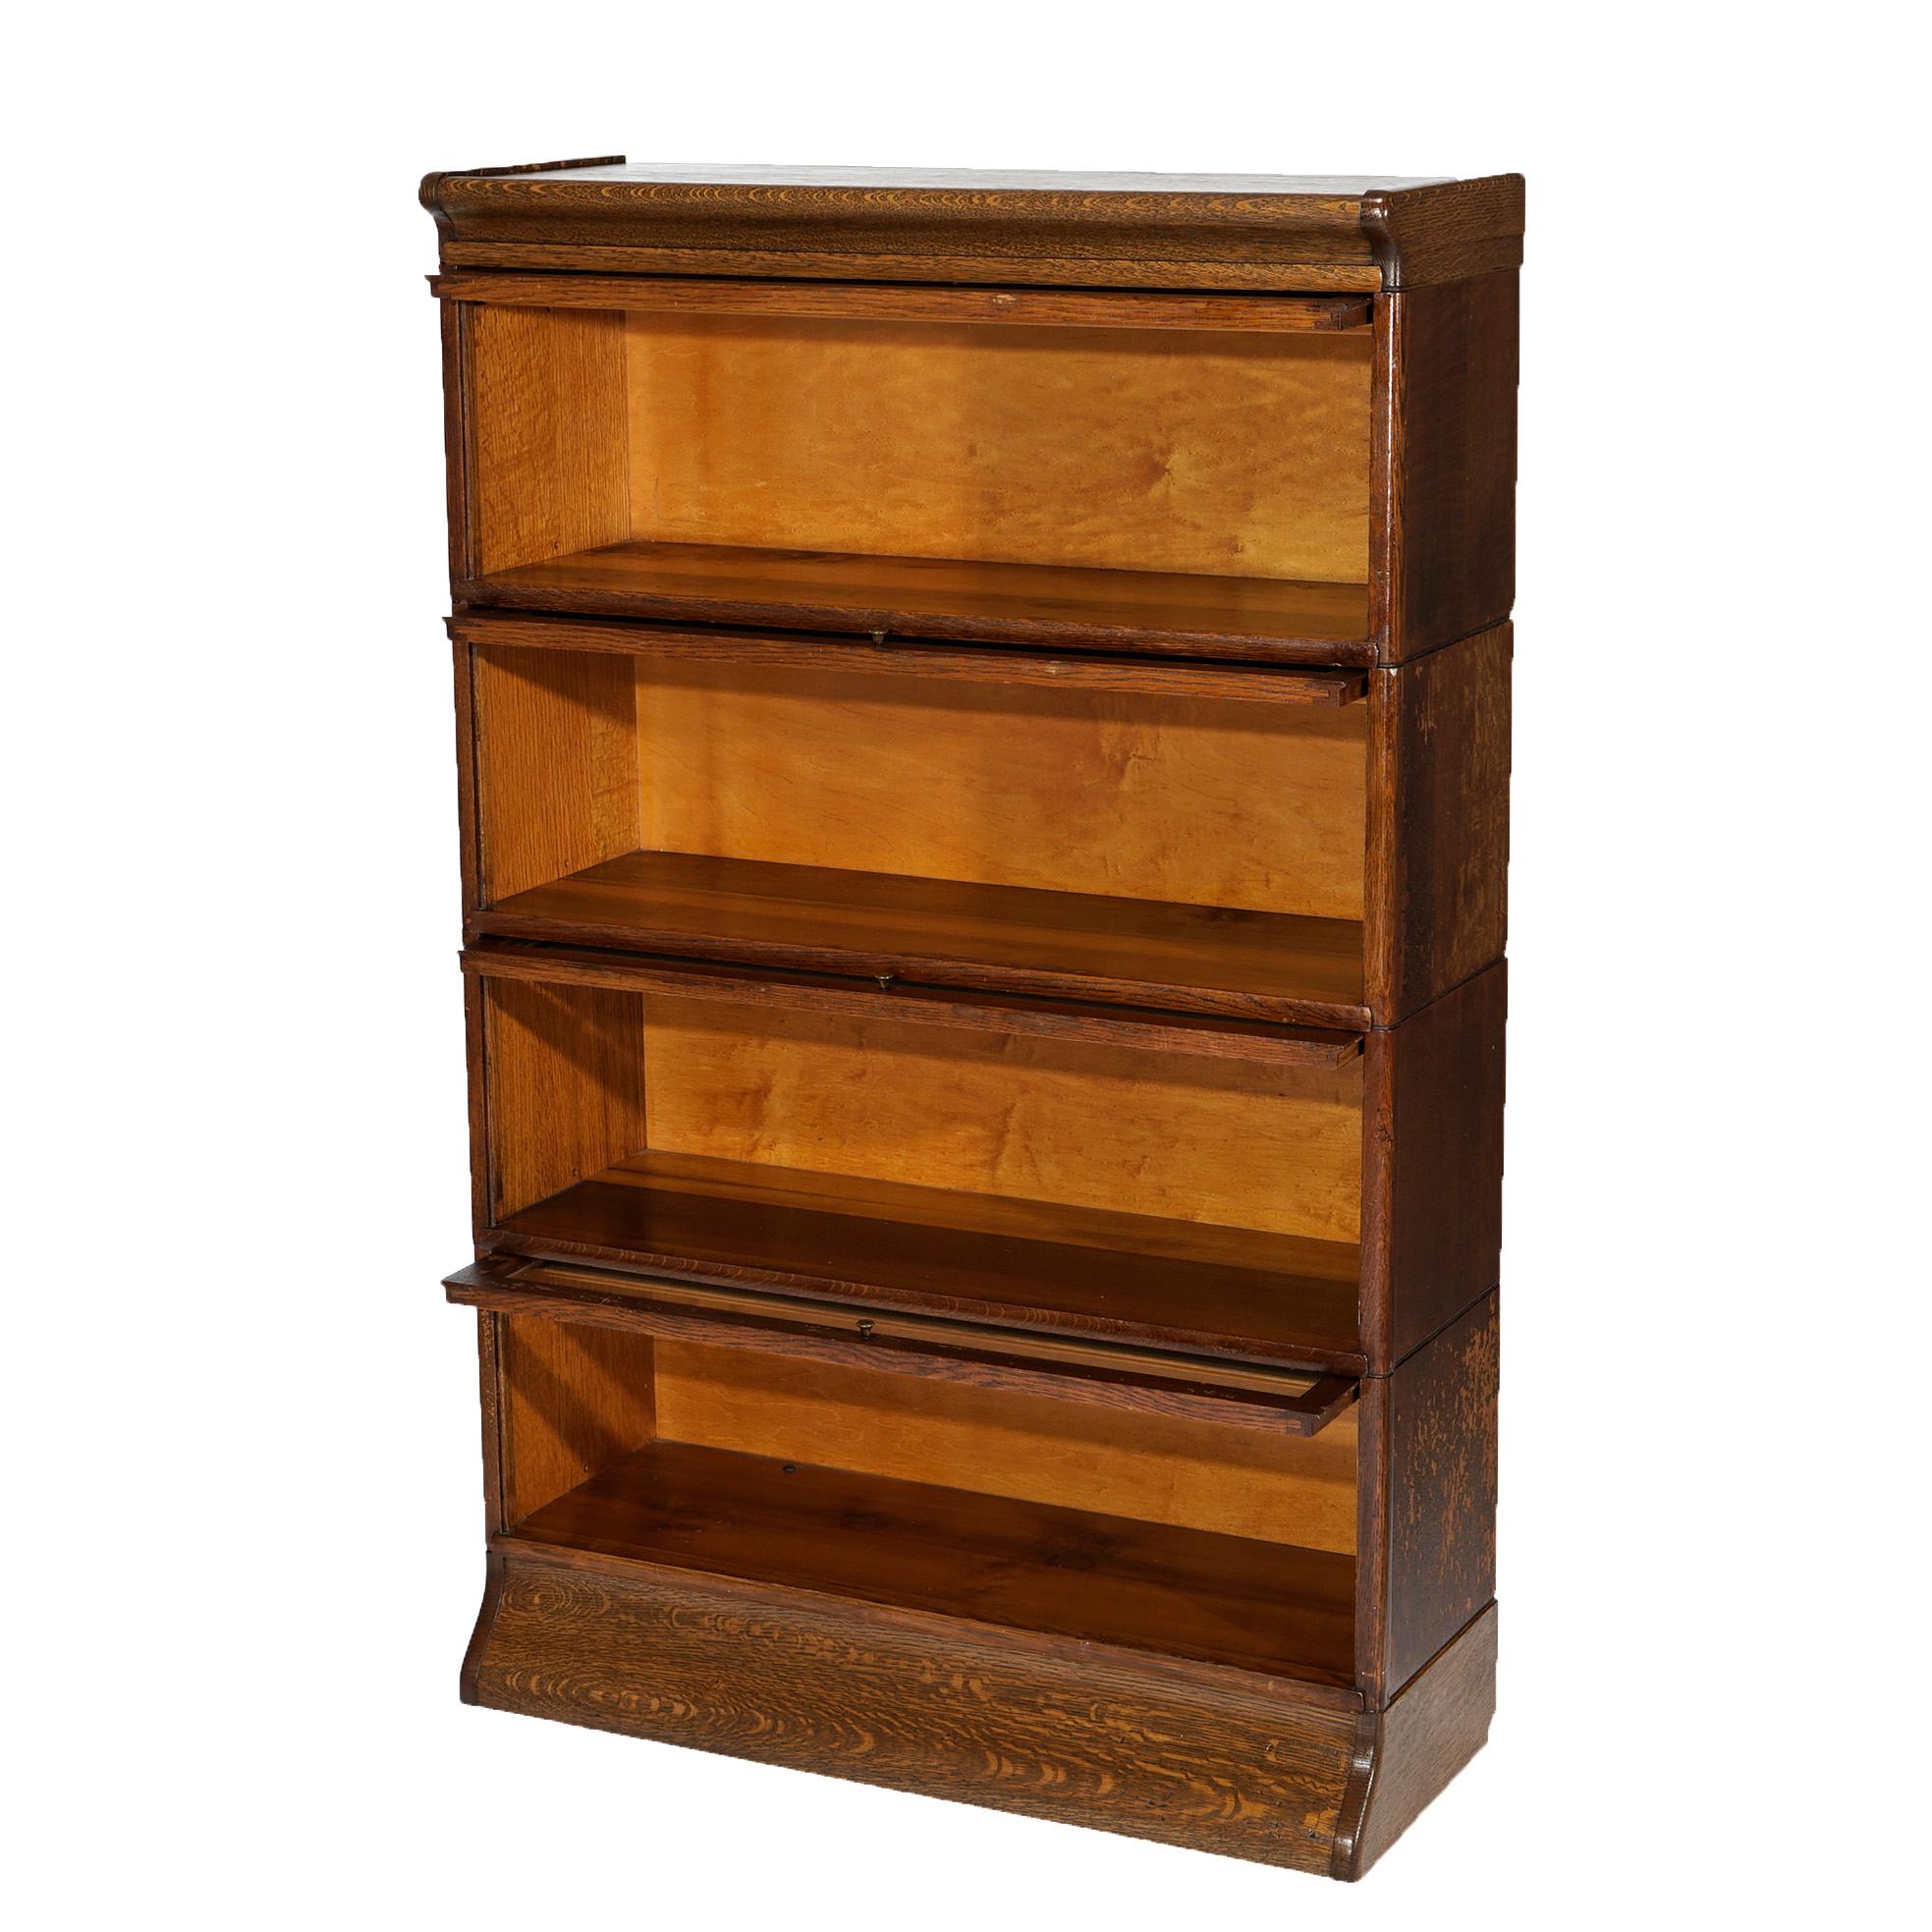 An antique Arts and Crafts barrister bookcase attributed to Macey offers quarter sawn oak construction with four stacks, each having pull out glass doors, raised on ogee base, c1910

Measures- 53.5'' H x 34'' W x 13.5'' D.

Catalogue Note: Ask about